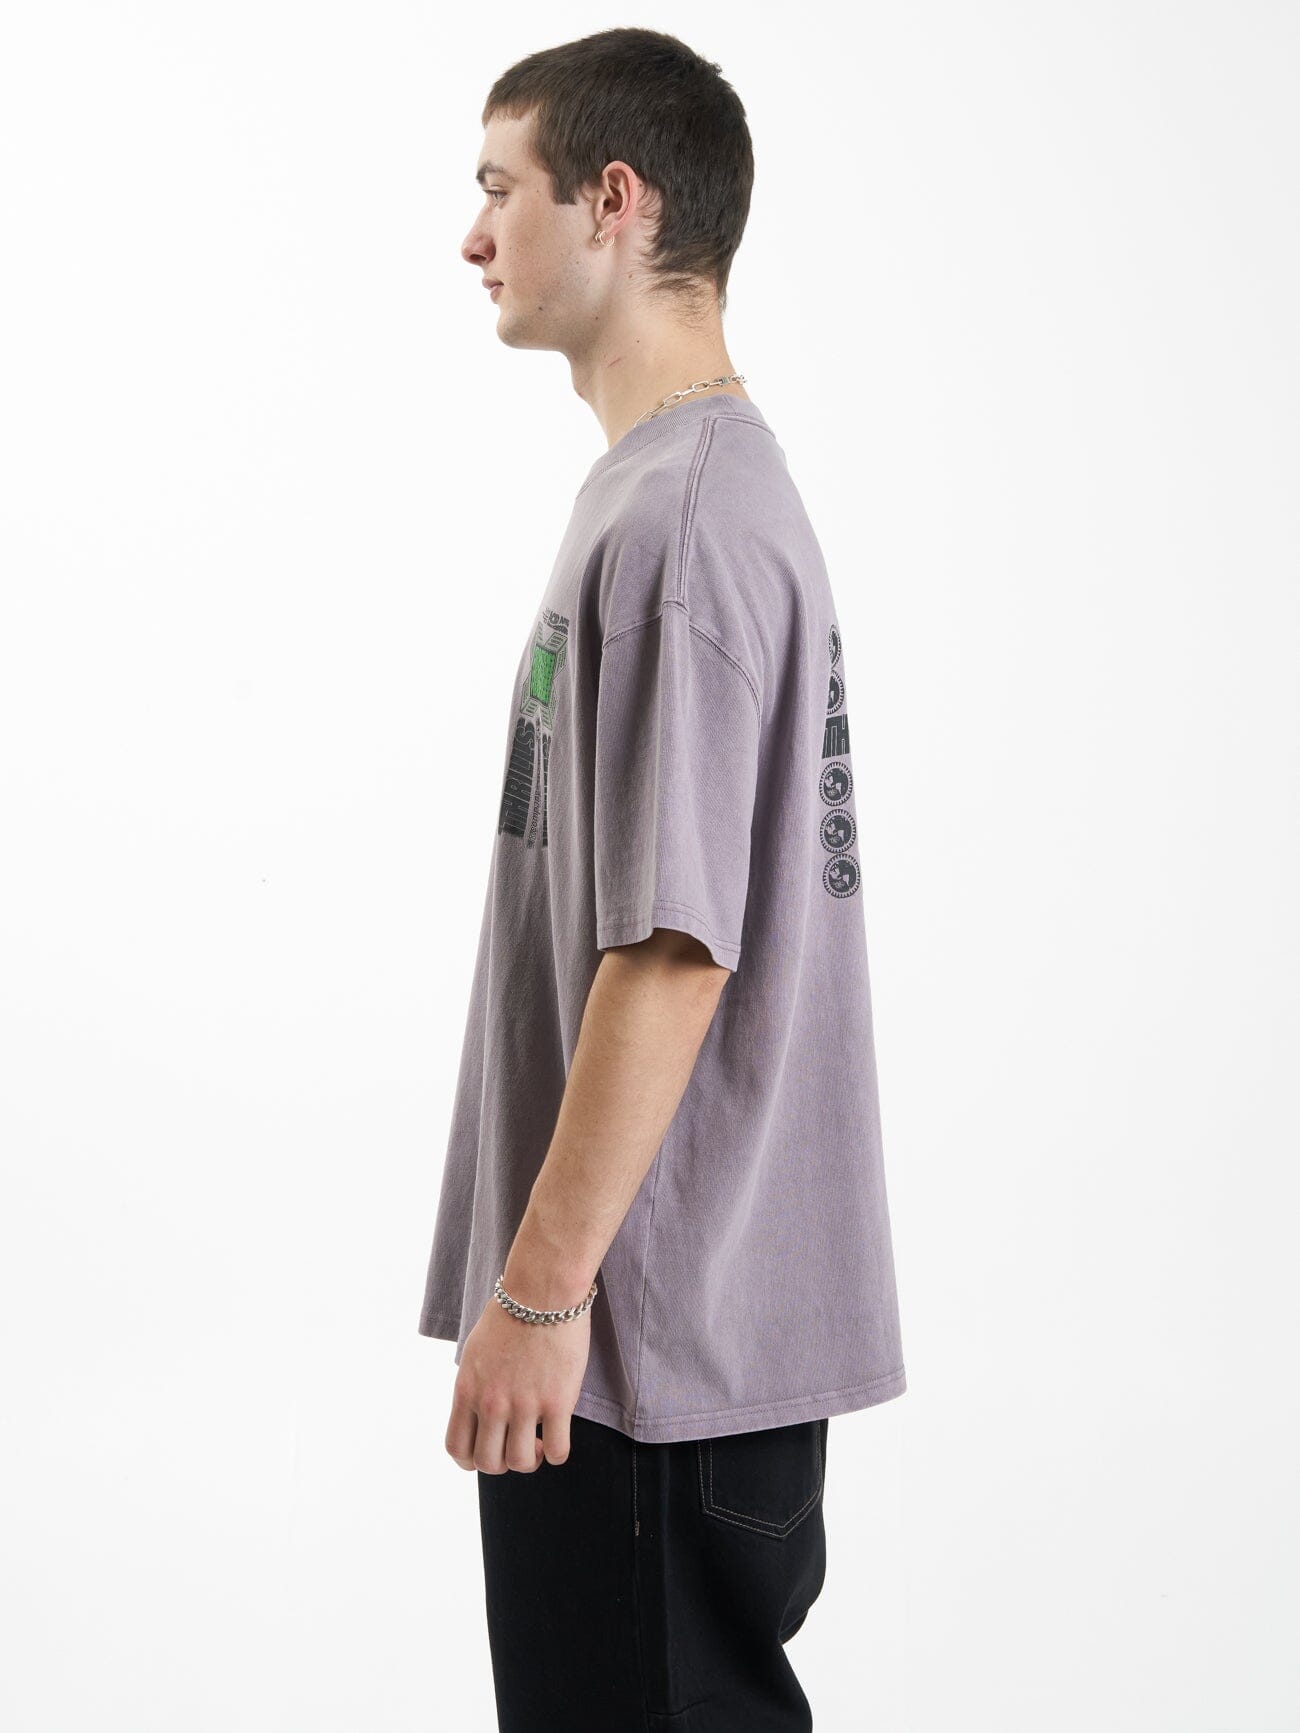 Vibrations Box Fit Oversize Tee - Mineral Gray